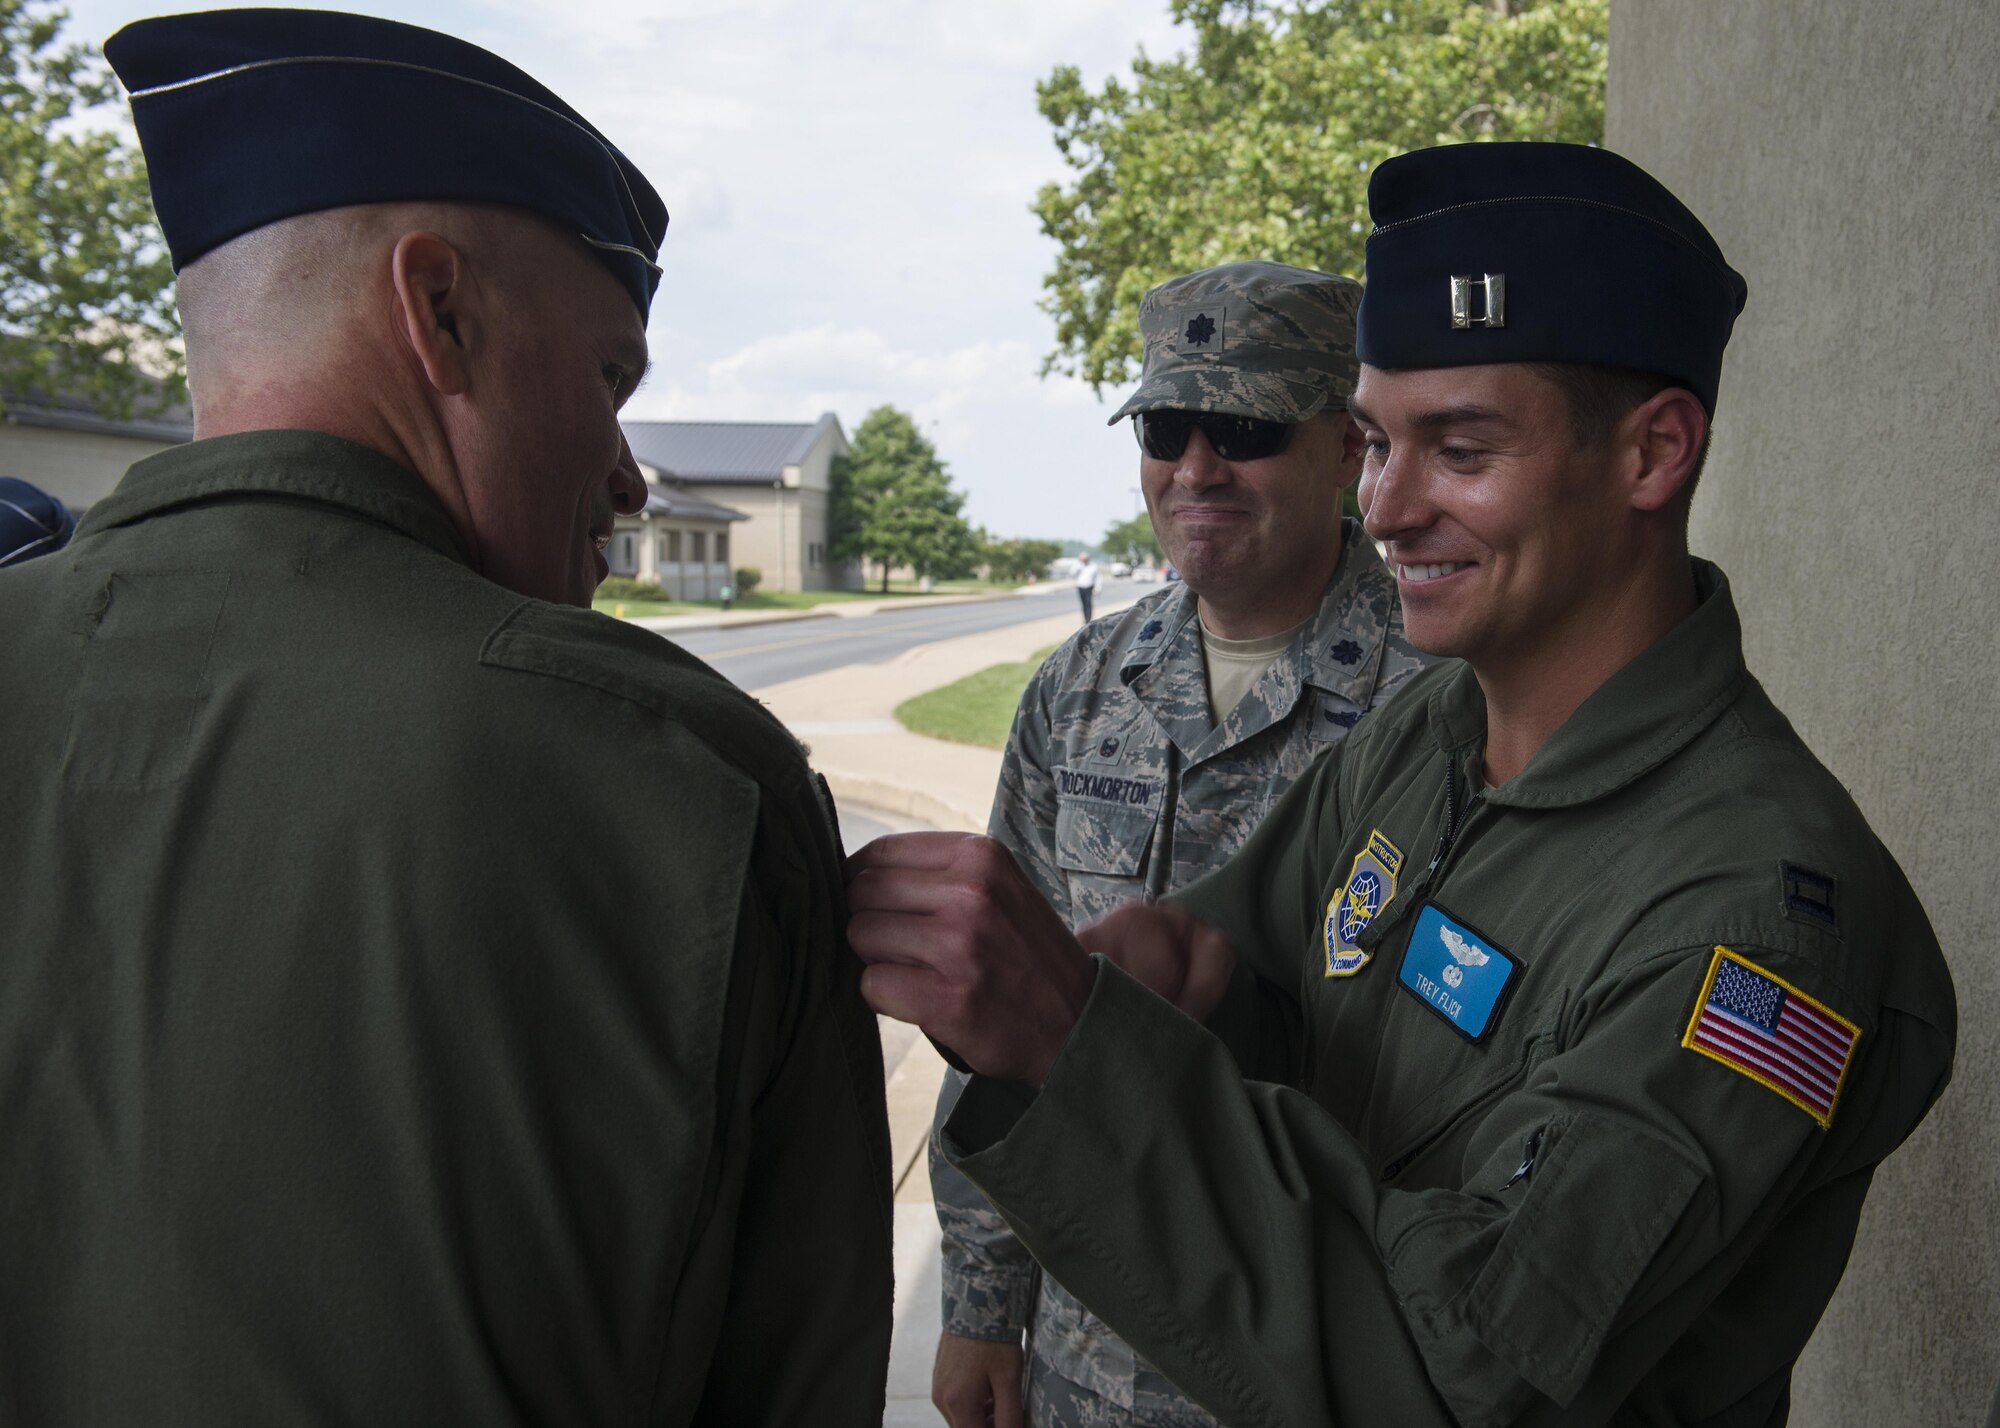 Capt. Trey Flick, 9th Airlift Squadron, places a 9th AS patch onto the shoulder of Gen. Carlton D. Everhart II, Air Mobility Command commander, during a base tour July 13, 2017, at Dover Air Force Base, Del. The 9th AS, also known as the Proud Pelicans, is Team Dover’s active duty squadron that operates the base’s fleet of C-5M Super Galaxy airlifters, providing rapid global mobility. (U.S. Air Force photo by Senior Airman Zachary Cacicia)